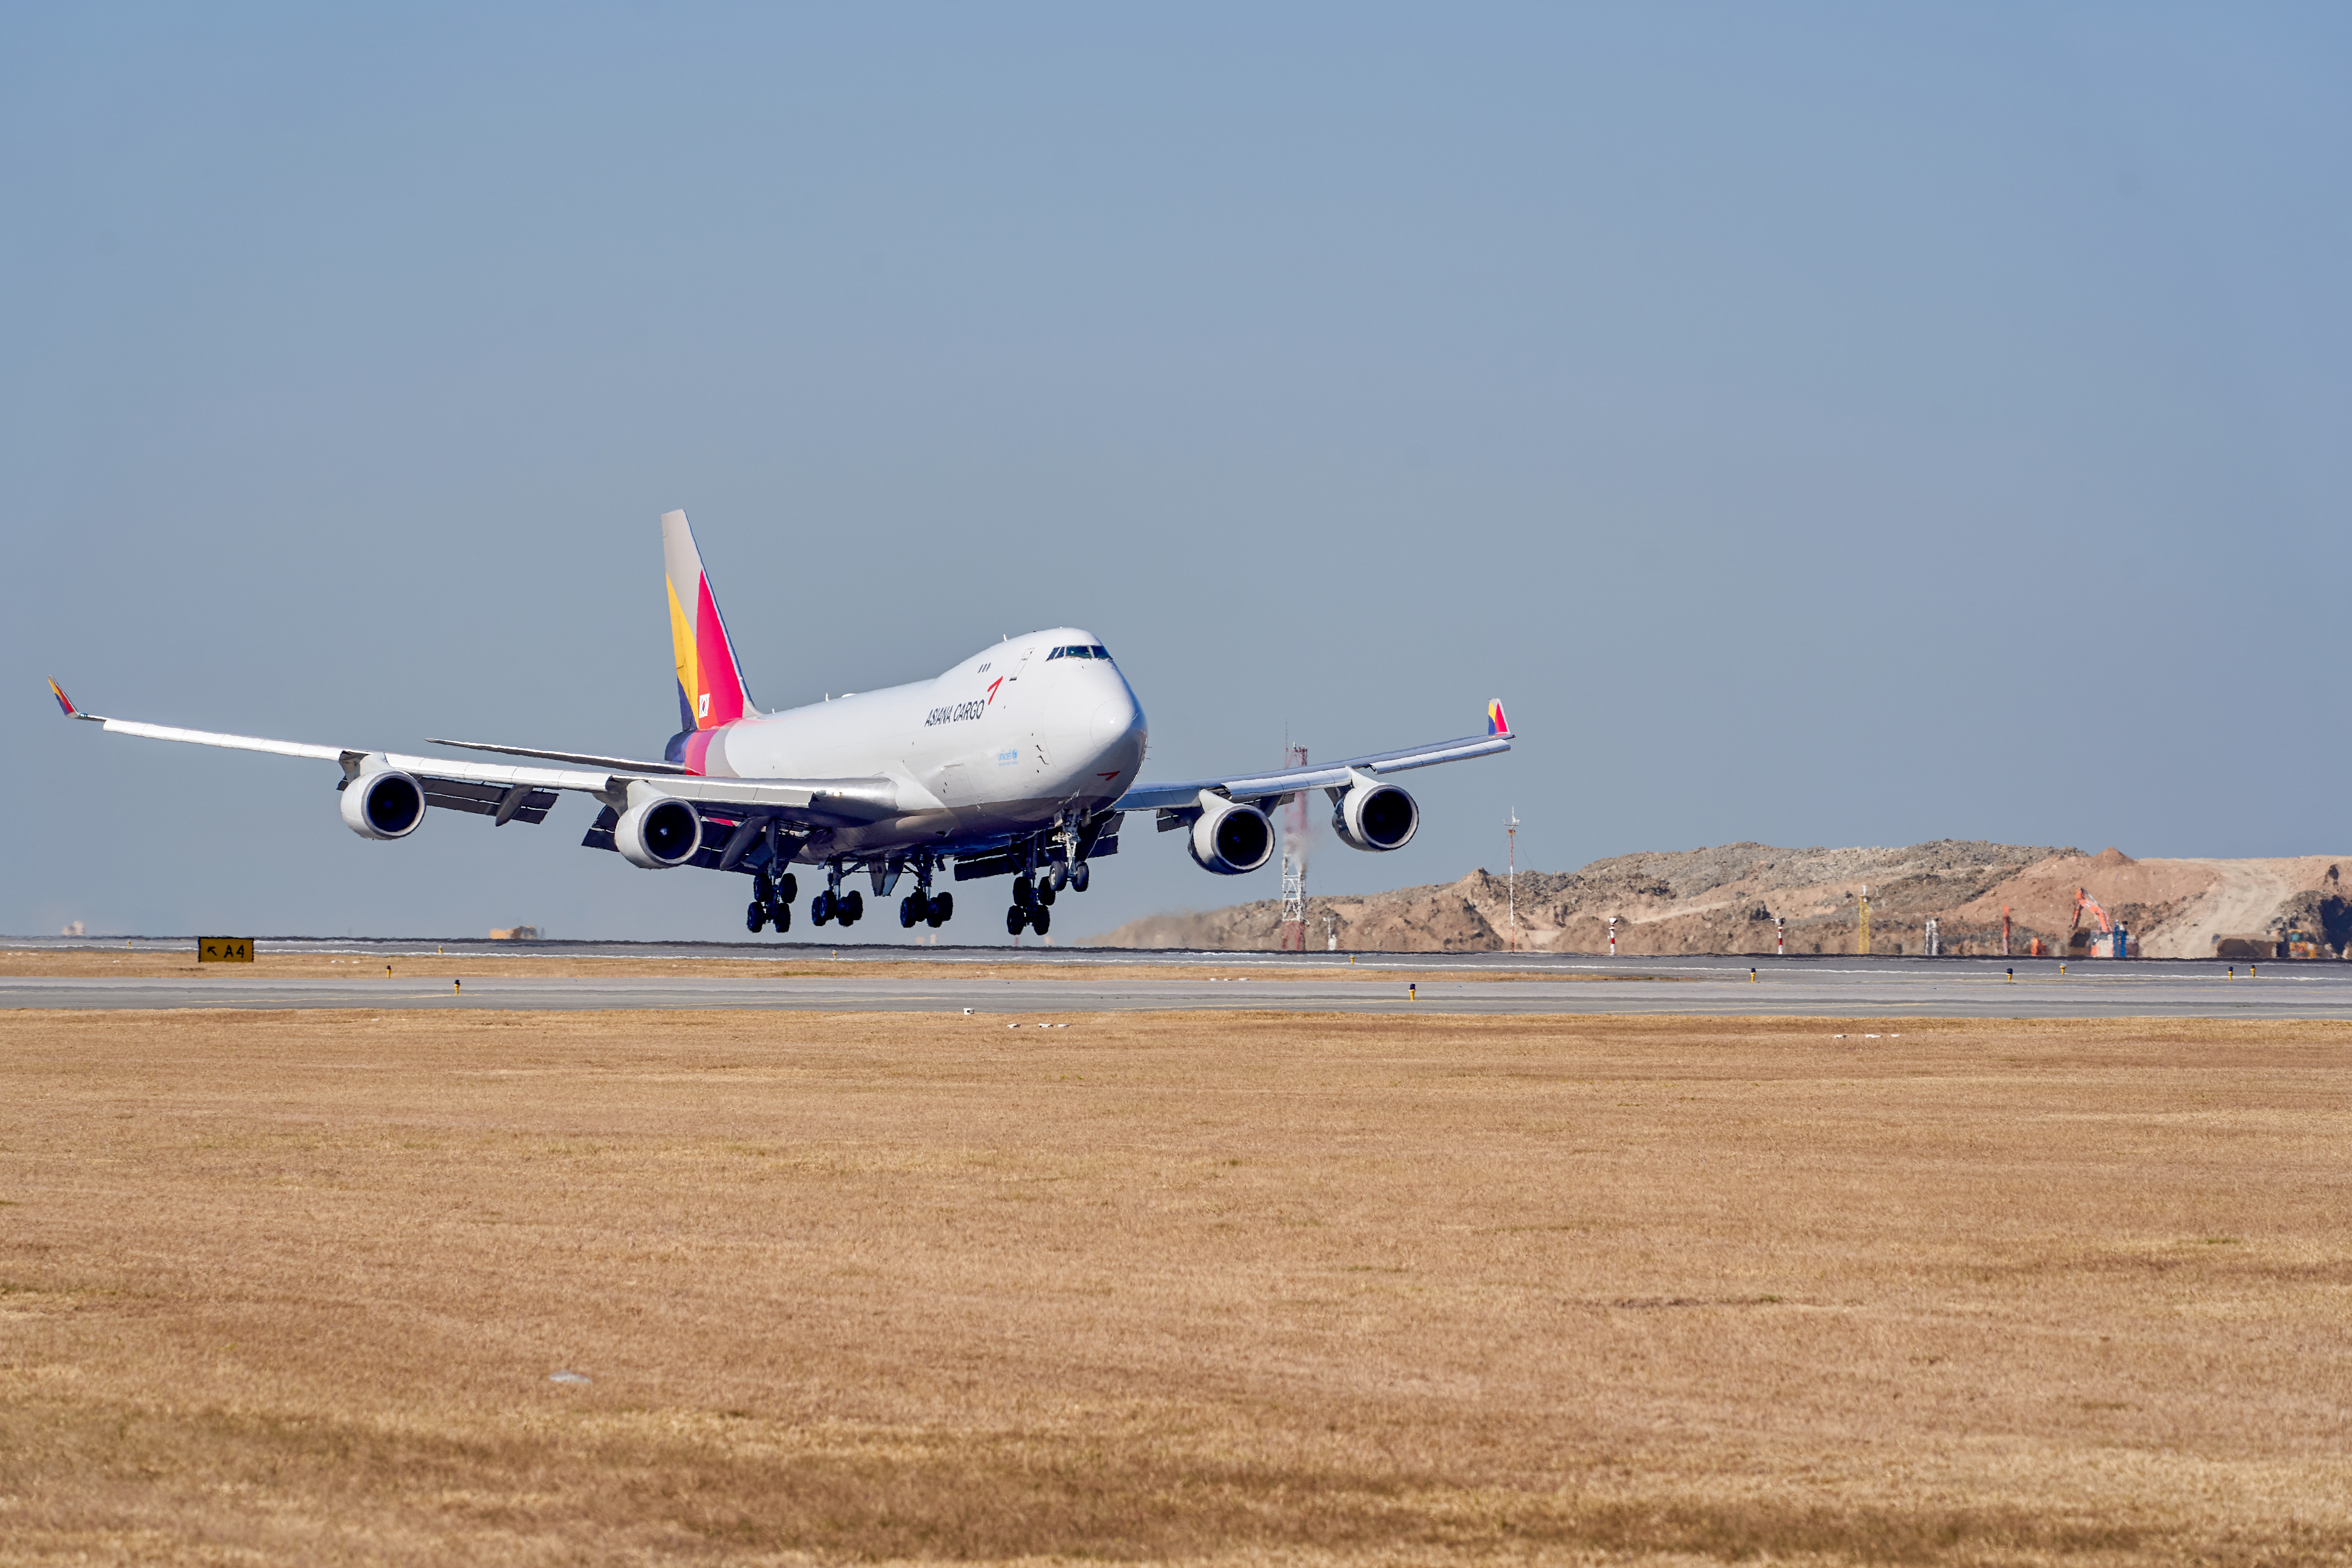 The first commercial flight lands on the Centre Runway.